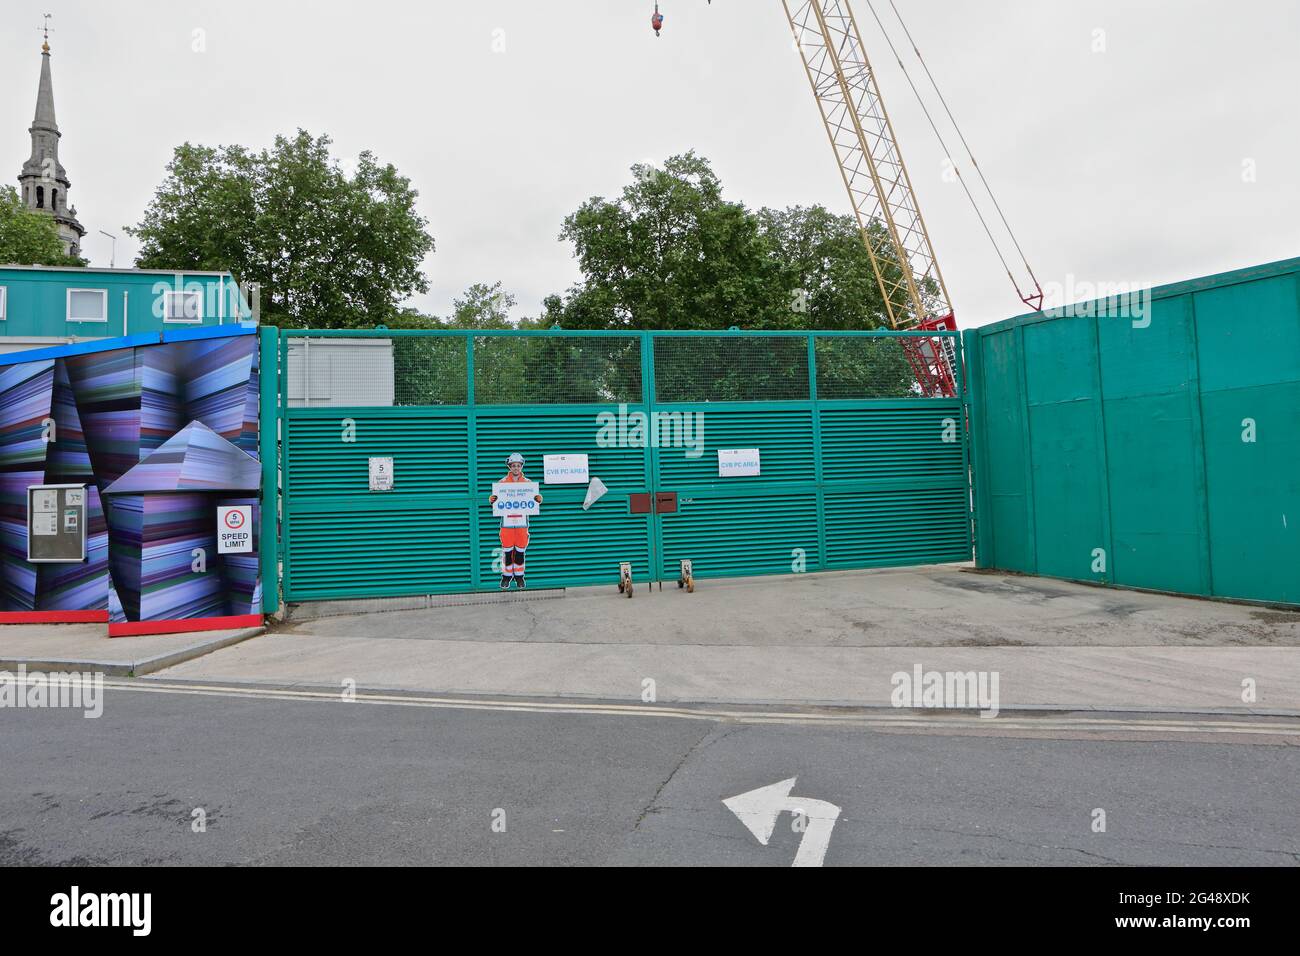 London (UK), June 2021: The Construction of London's new sewage overflow waste management system which will replace the extant 150 year old system. Stock Photo